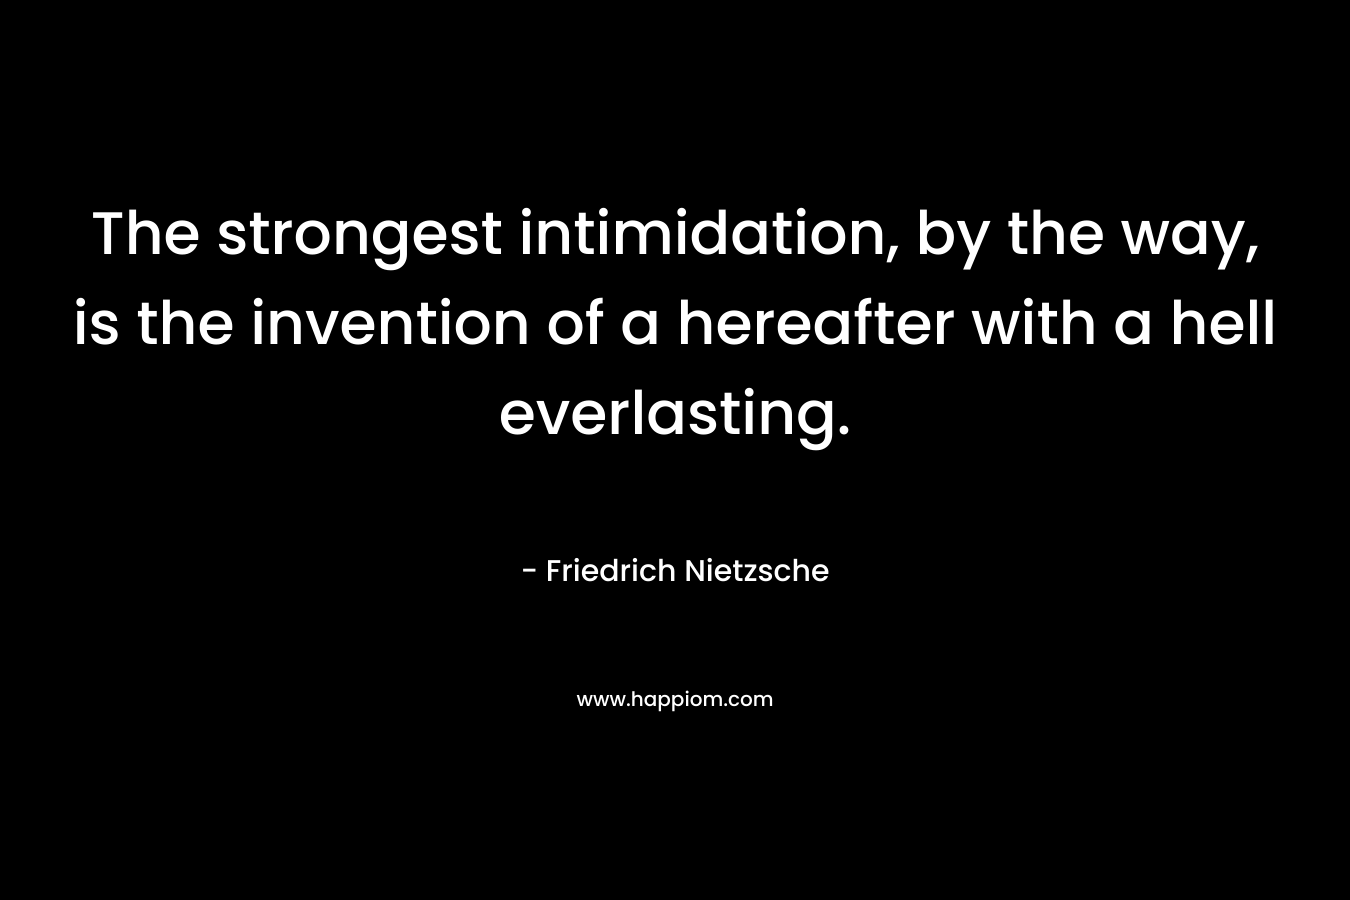 The strongest intimidation, by the way, is the invention of a hereafter with a hell everlasting.